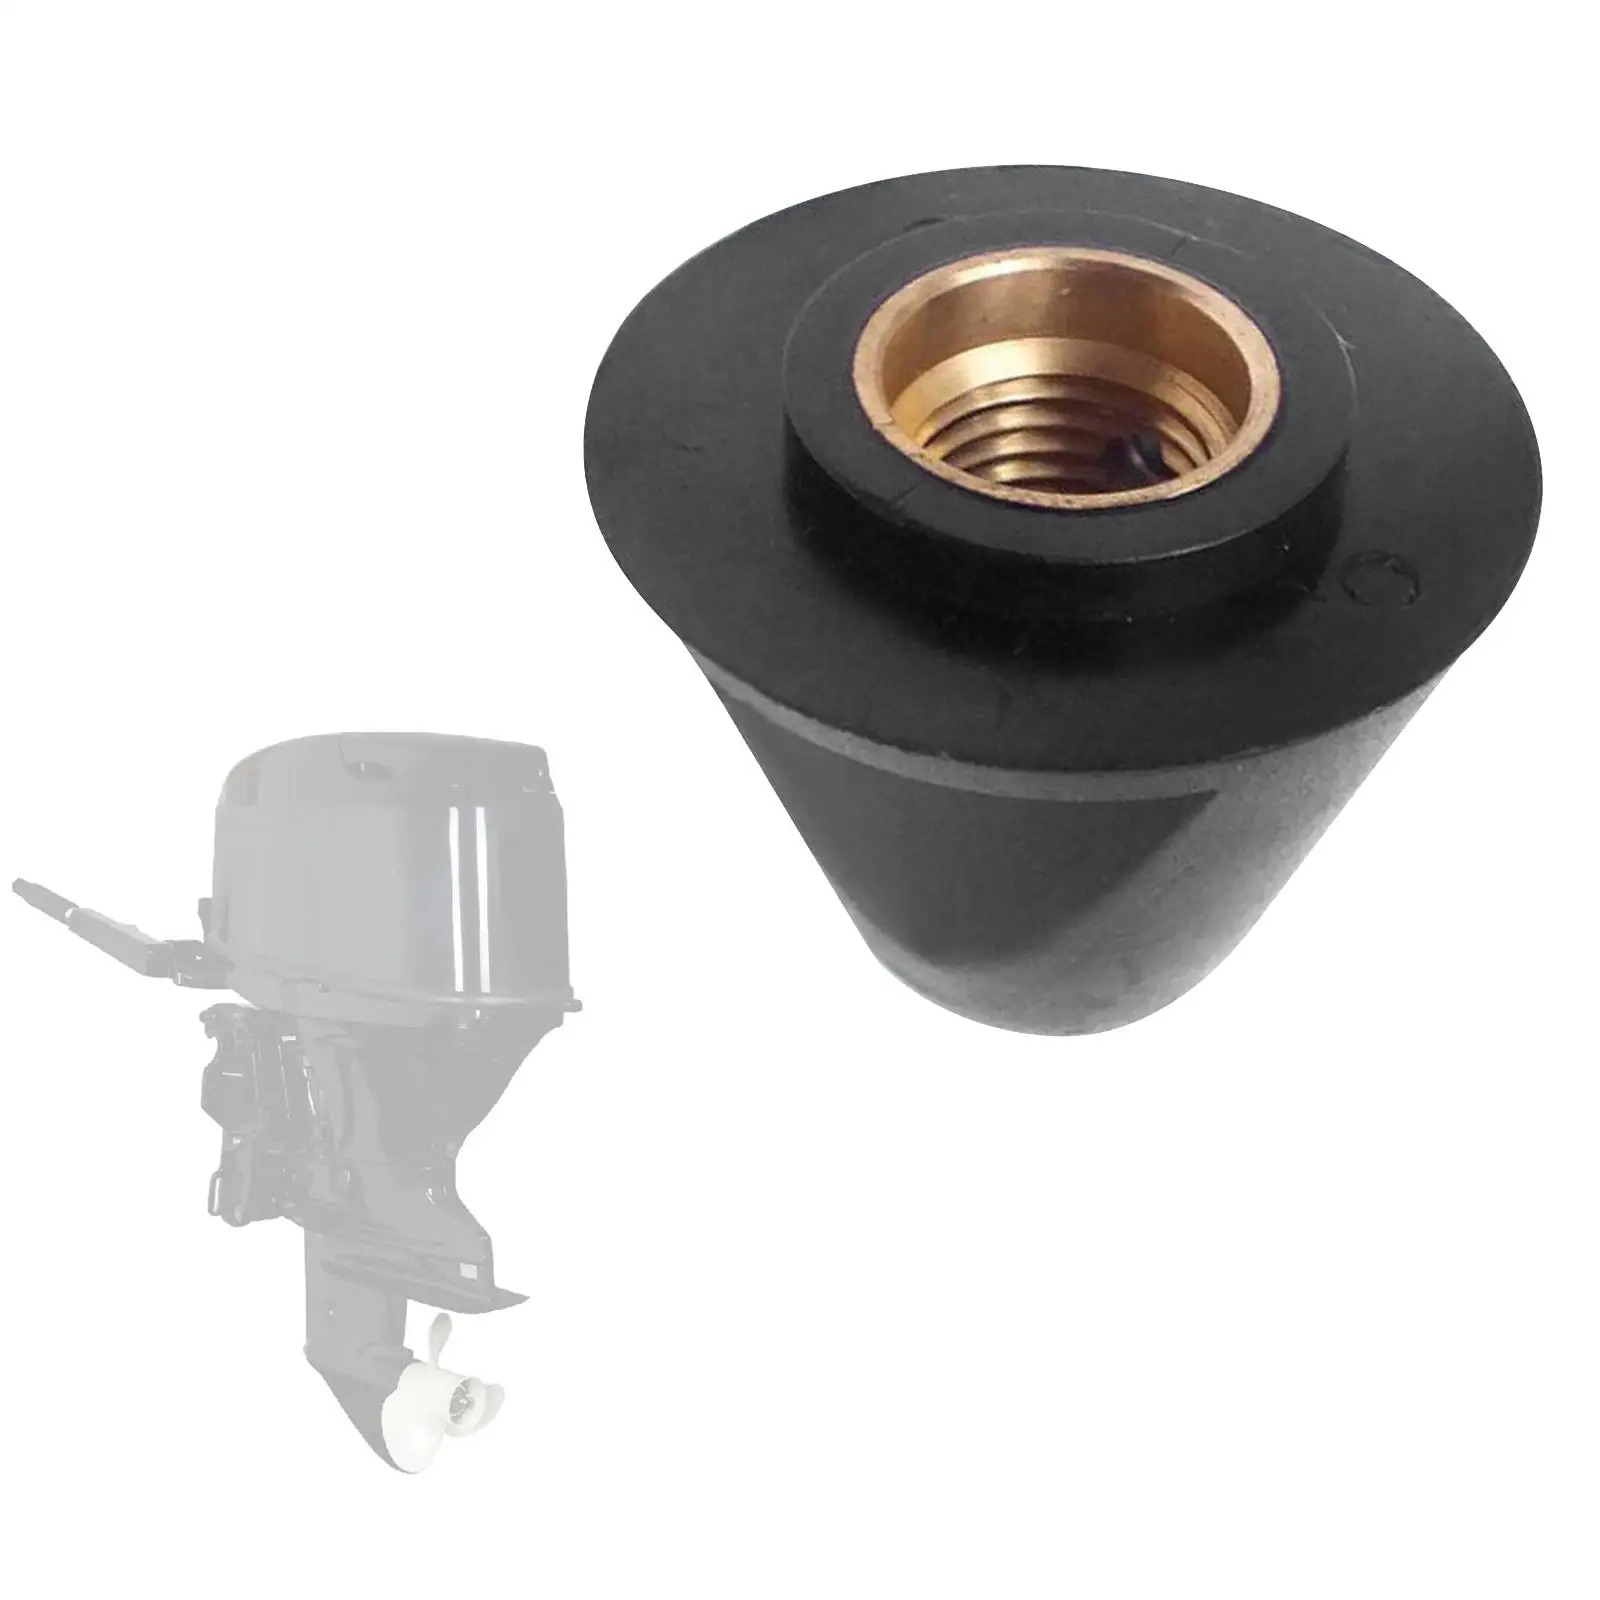 Boat Propeller Prop Nut 647-45616-02 Spare Parts for Yamaha Outboard 4HP 5HP 2 Stroke Easily to Install Durable